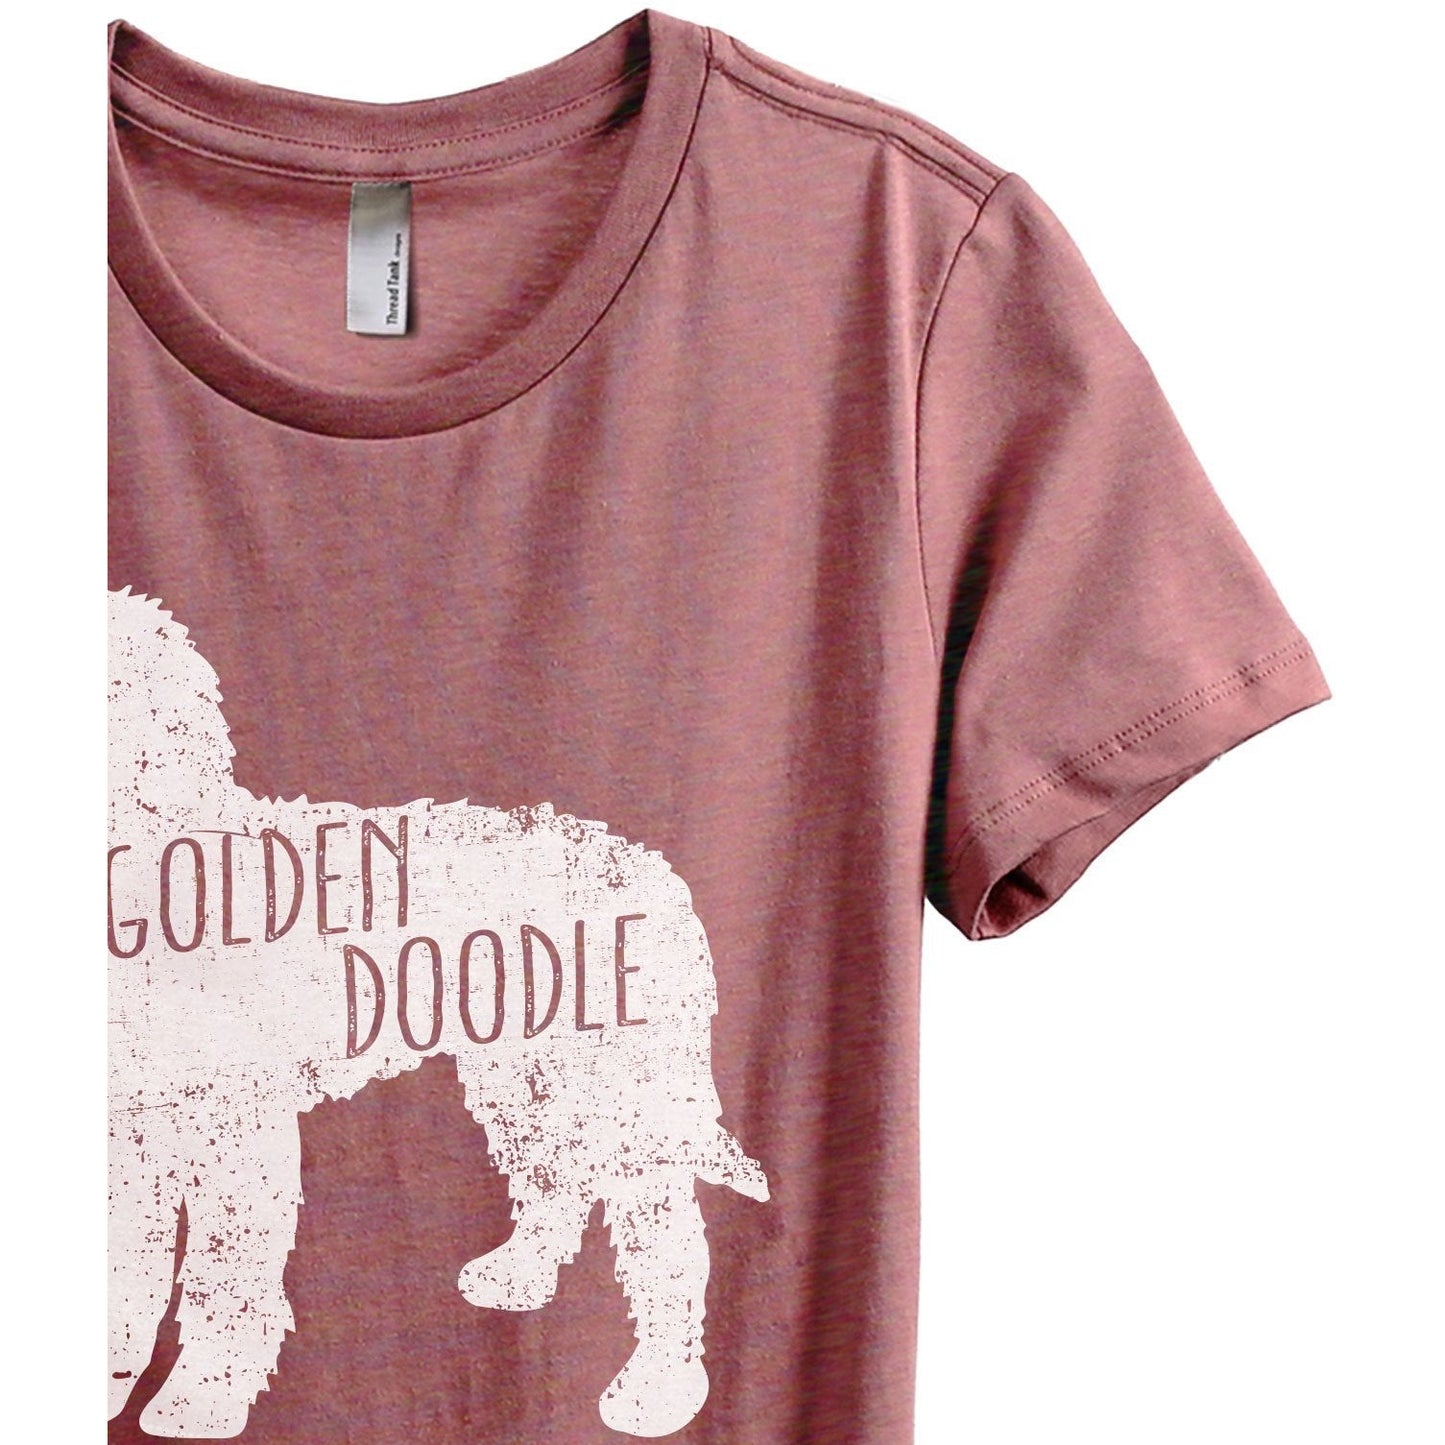 Golden Doodle Silhouette Women's Relaxed Crewneck T-Shirt Top Tee Heather Rouge Zoom Details
